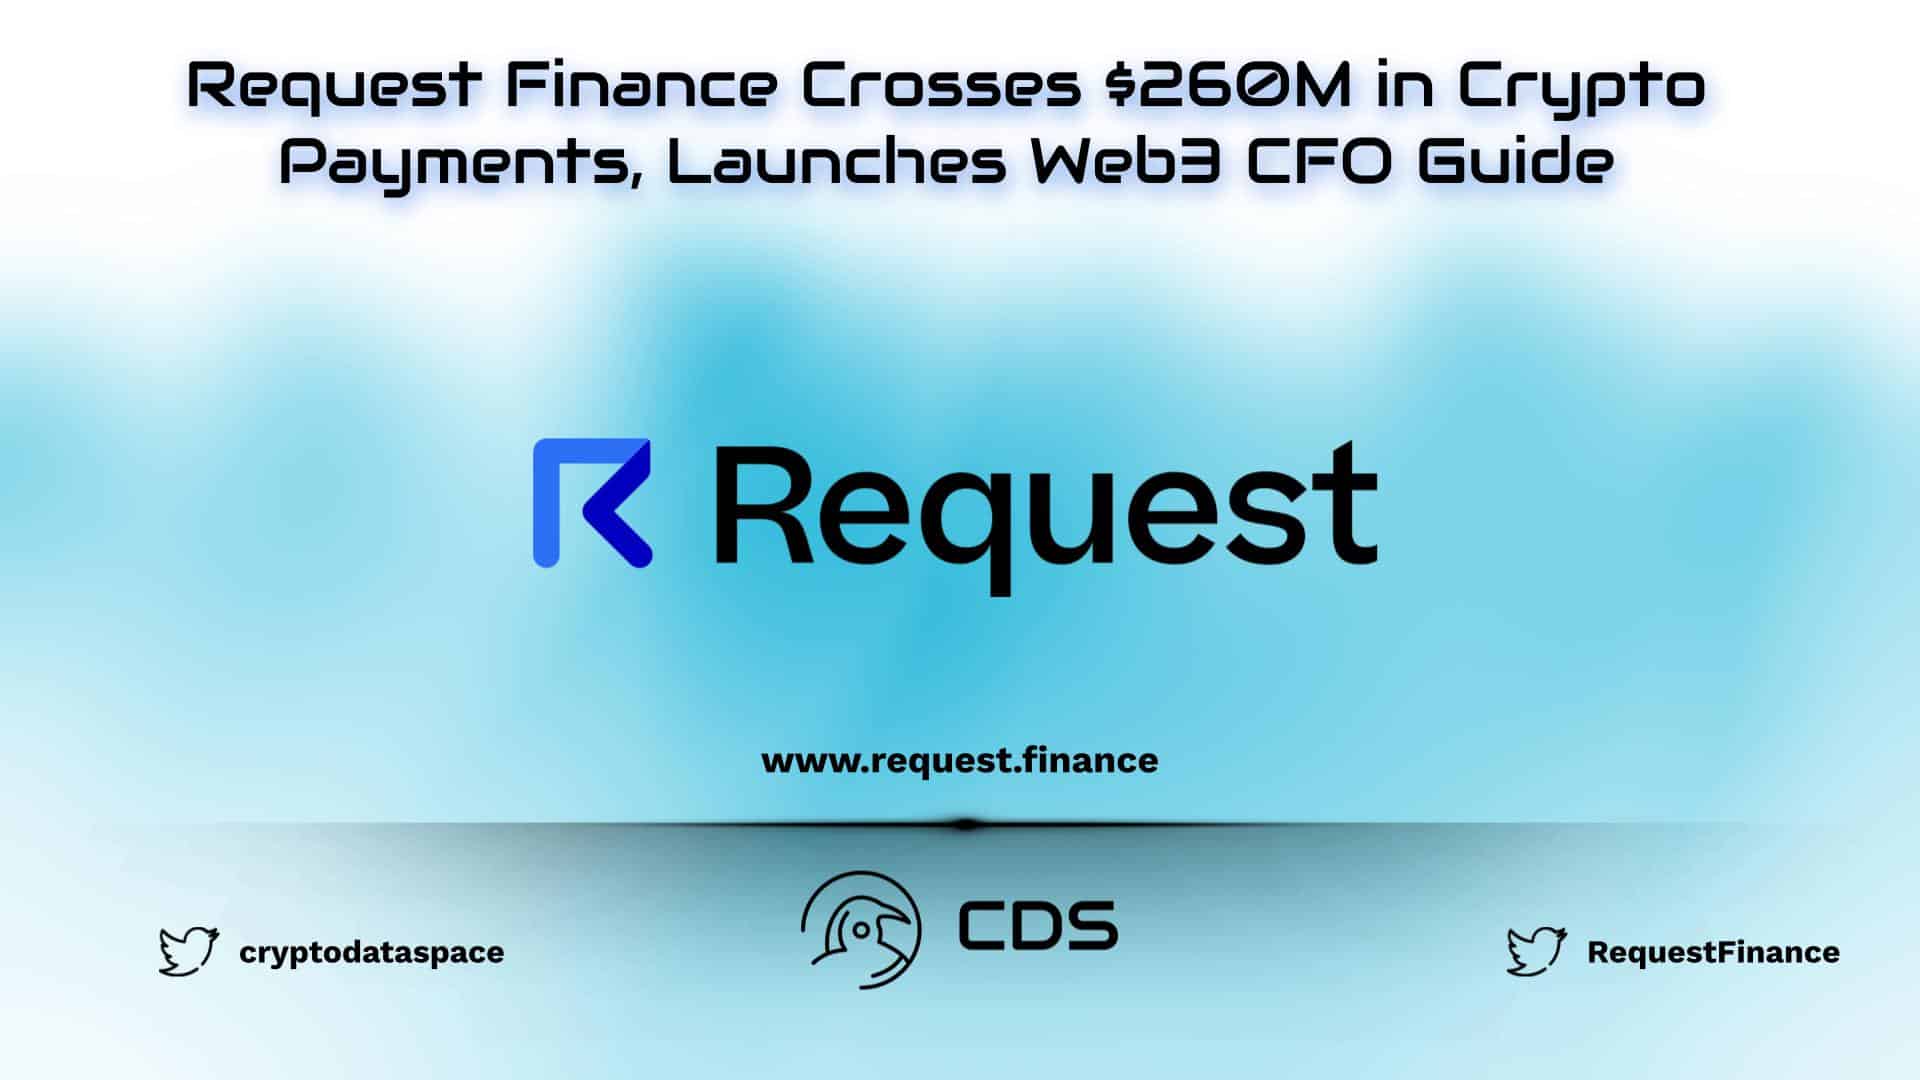 Request Finance Crosses $260M in Crypto Payments, Launches Web3 CFO Guide